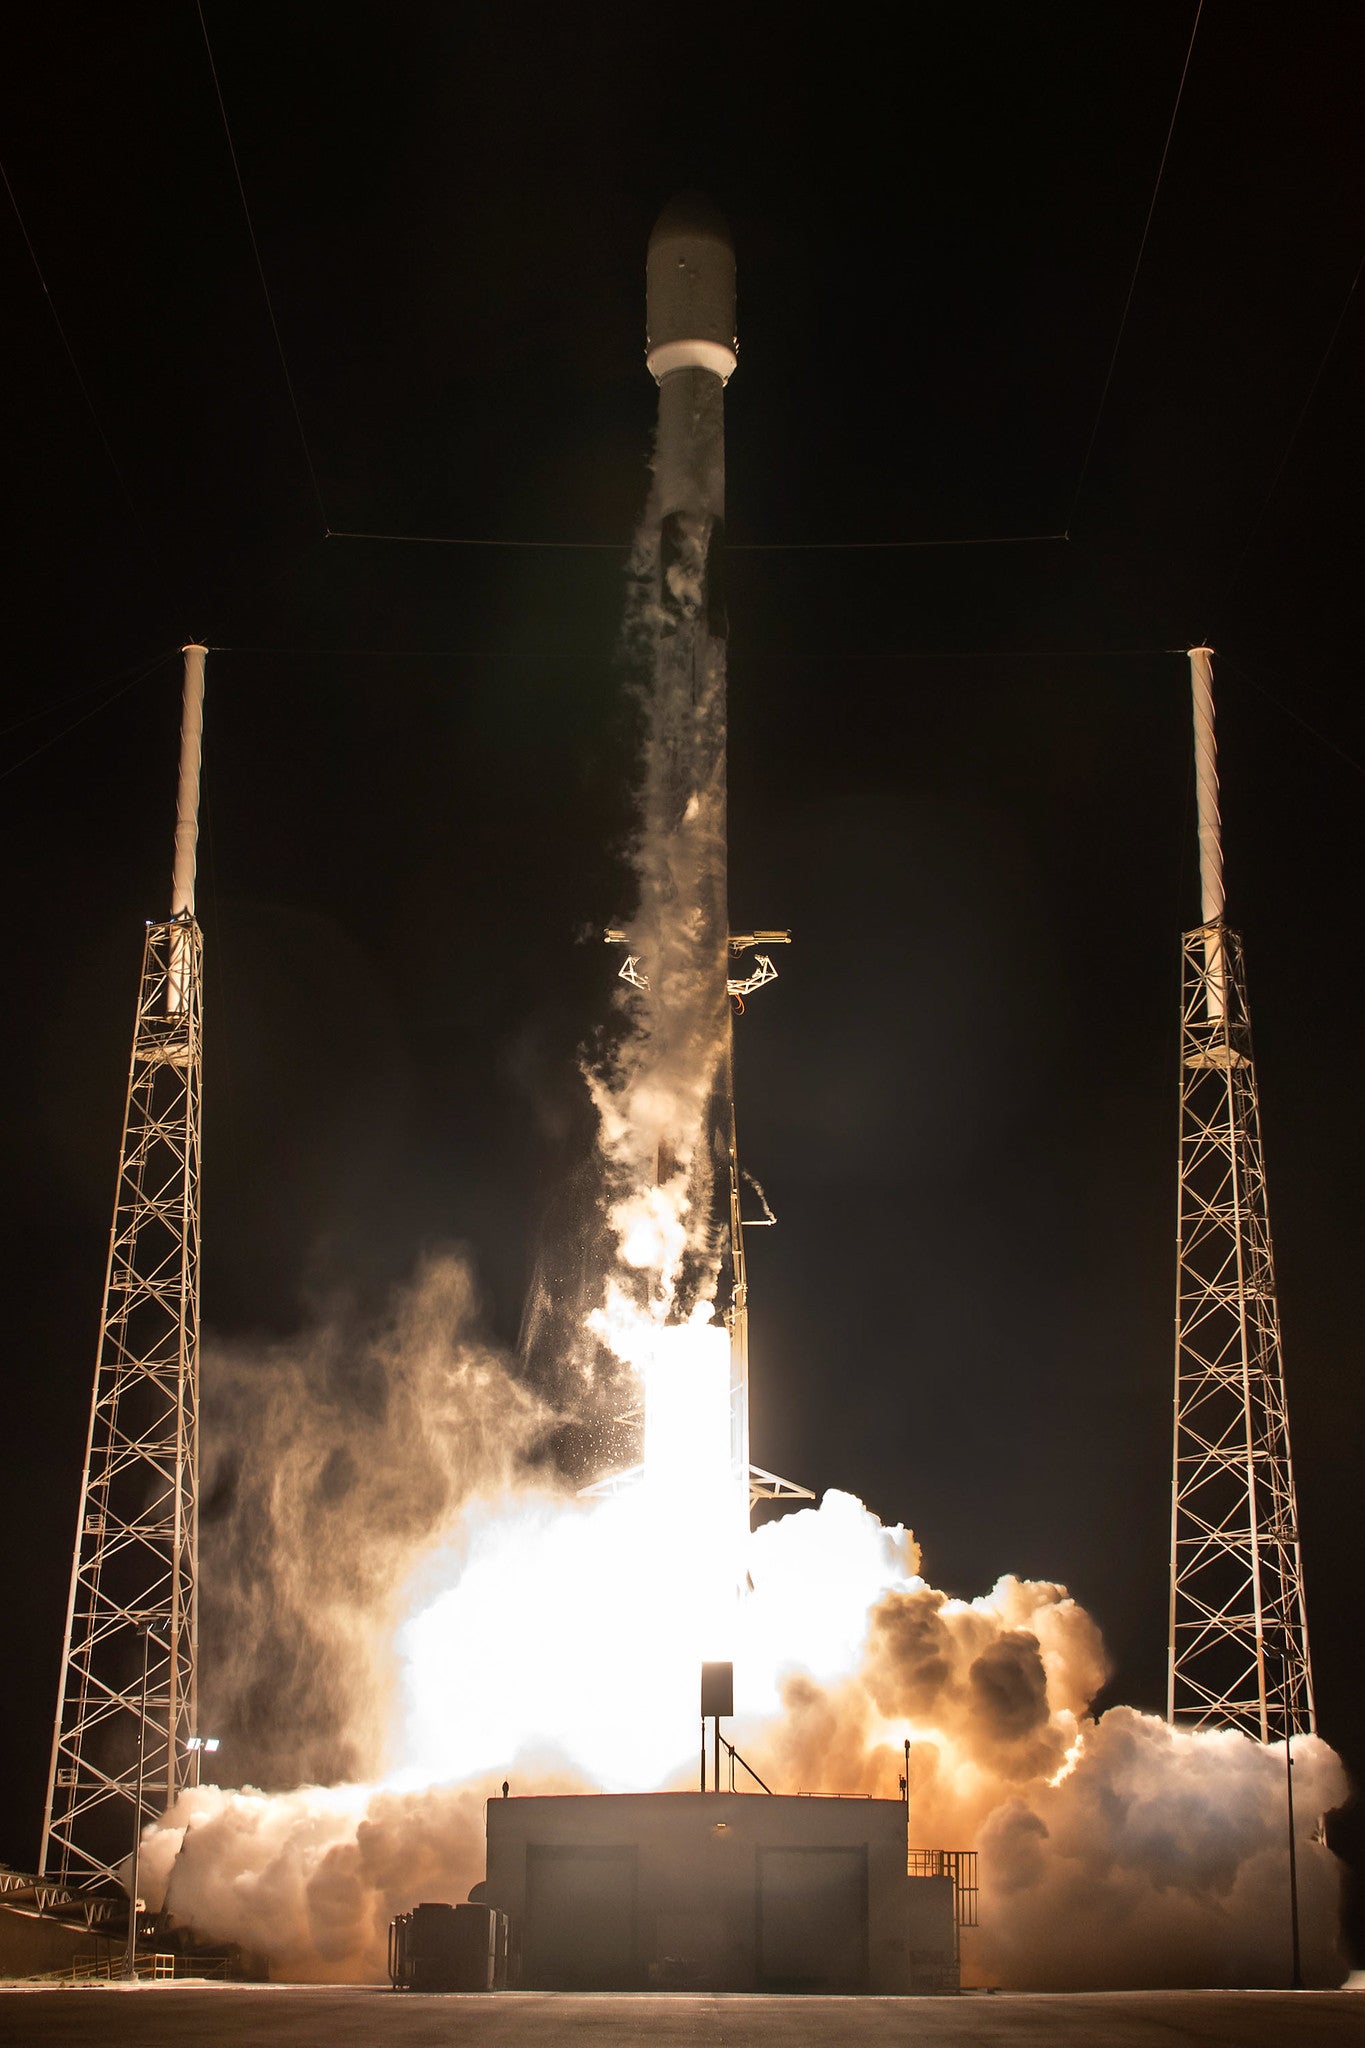 The 19 June SpaceX rocket launch that may have created a red glow in the sky